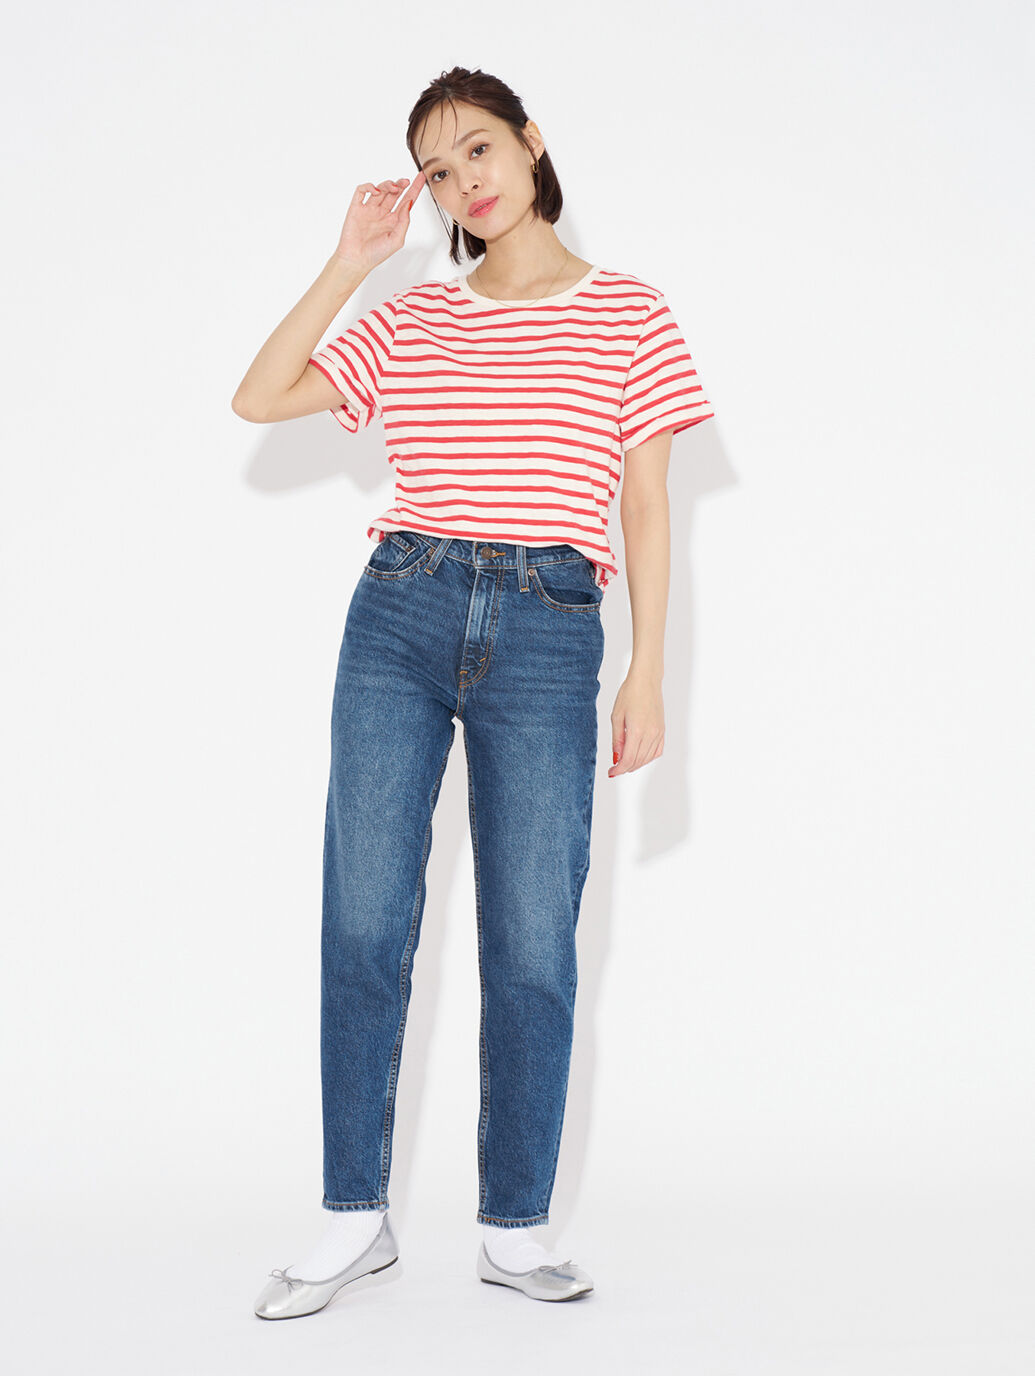 MARGOT ボーダーTシャツ レッド STRIPE CORAL RED｜リーバイス® 公式通販